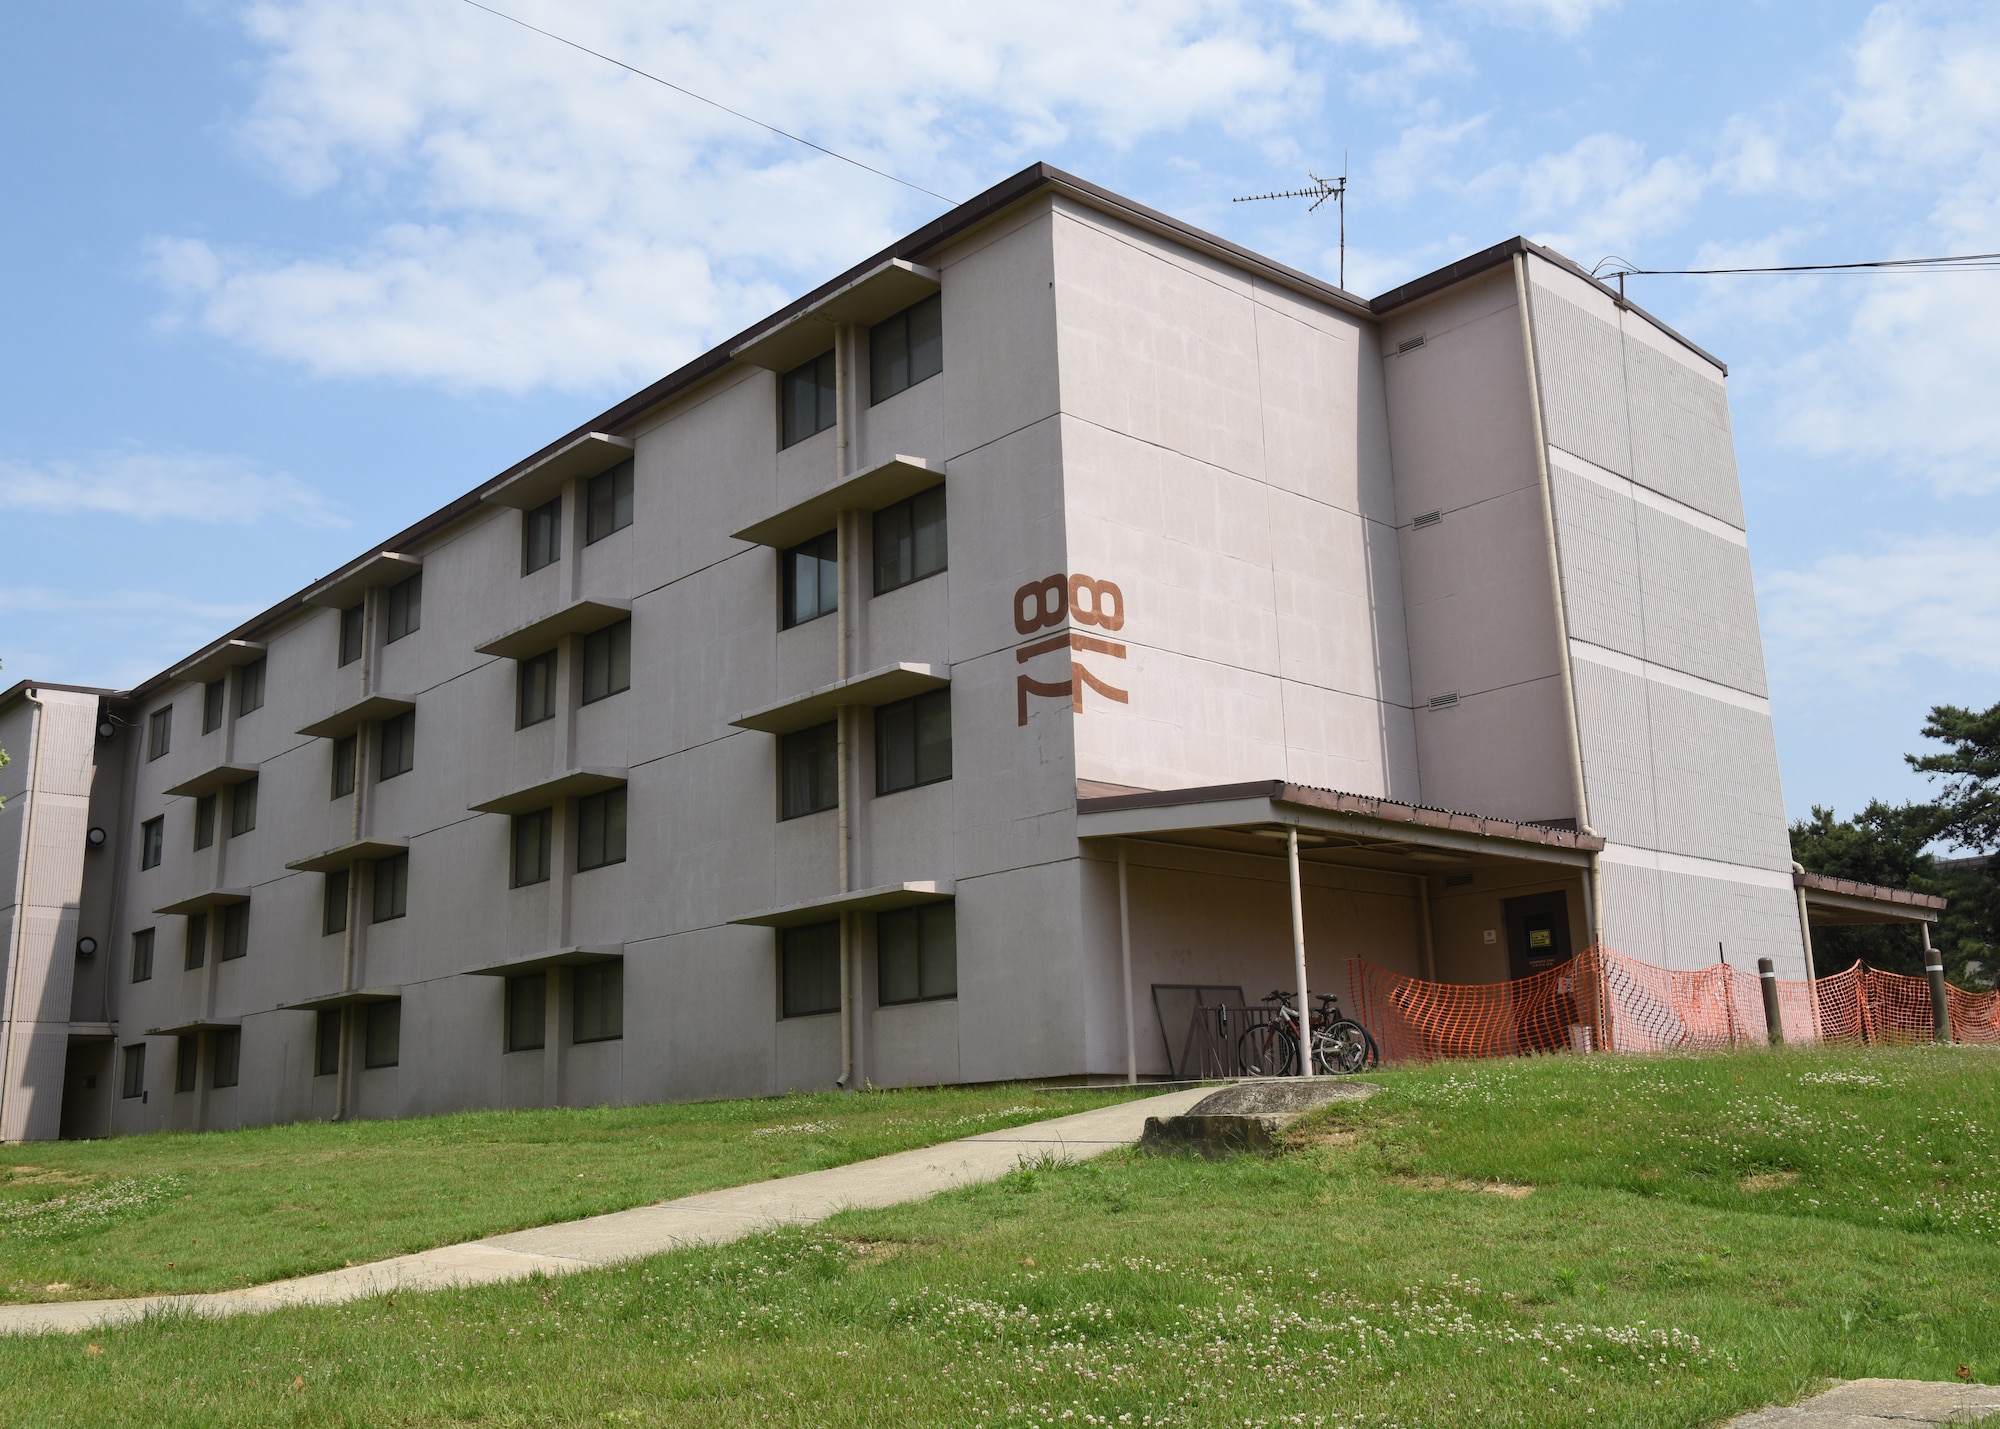 Osan Airmen will experience enhanced quality of living conditions throughout the duration of the 51st Civil Engineer Squadron’s Dorm Divestment project. The plan’s initial three-year iteration will allow more Airmen to move off base, replace old infrastructure with newer dormitories, and a larger child development center. (U.S. Air Force photo by Senior Airman Denise M. Jenson)